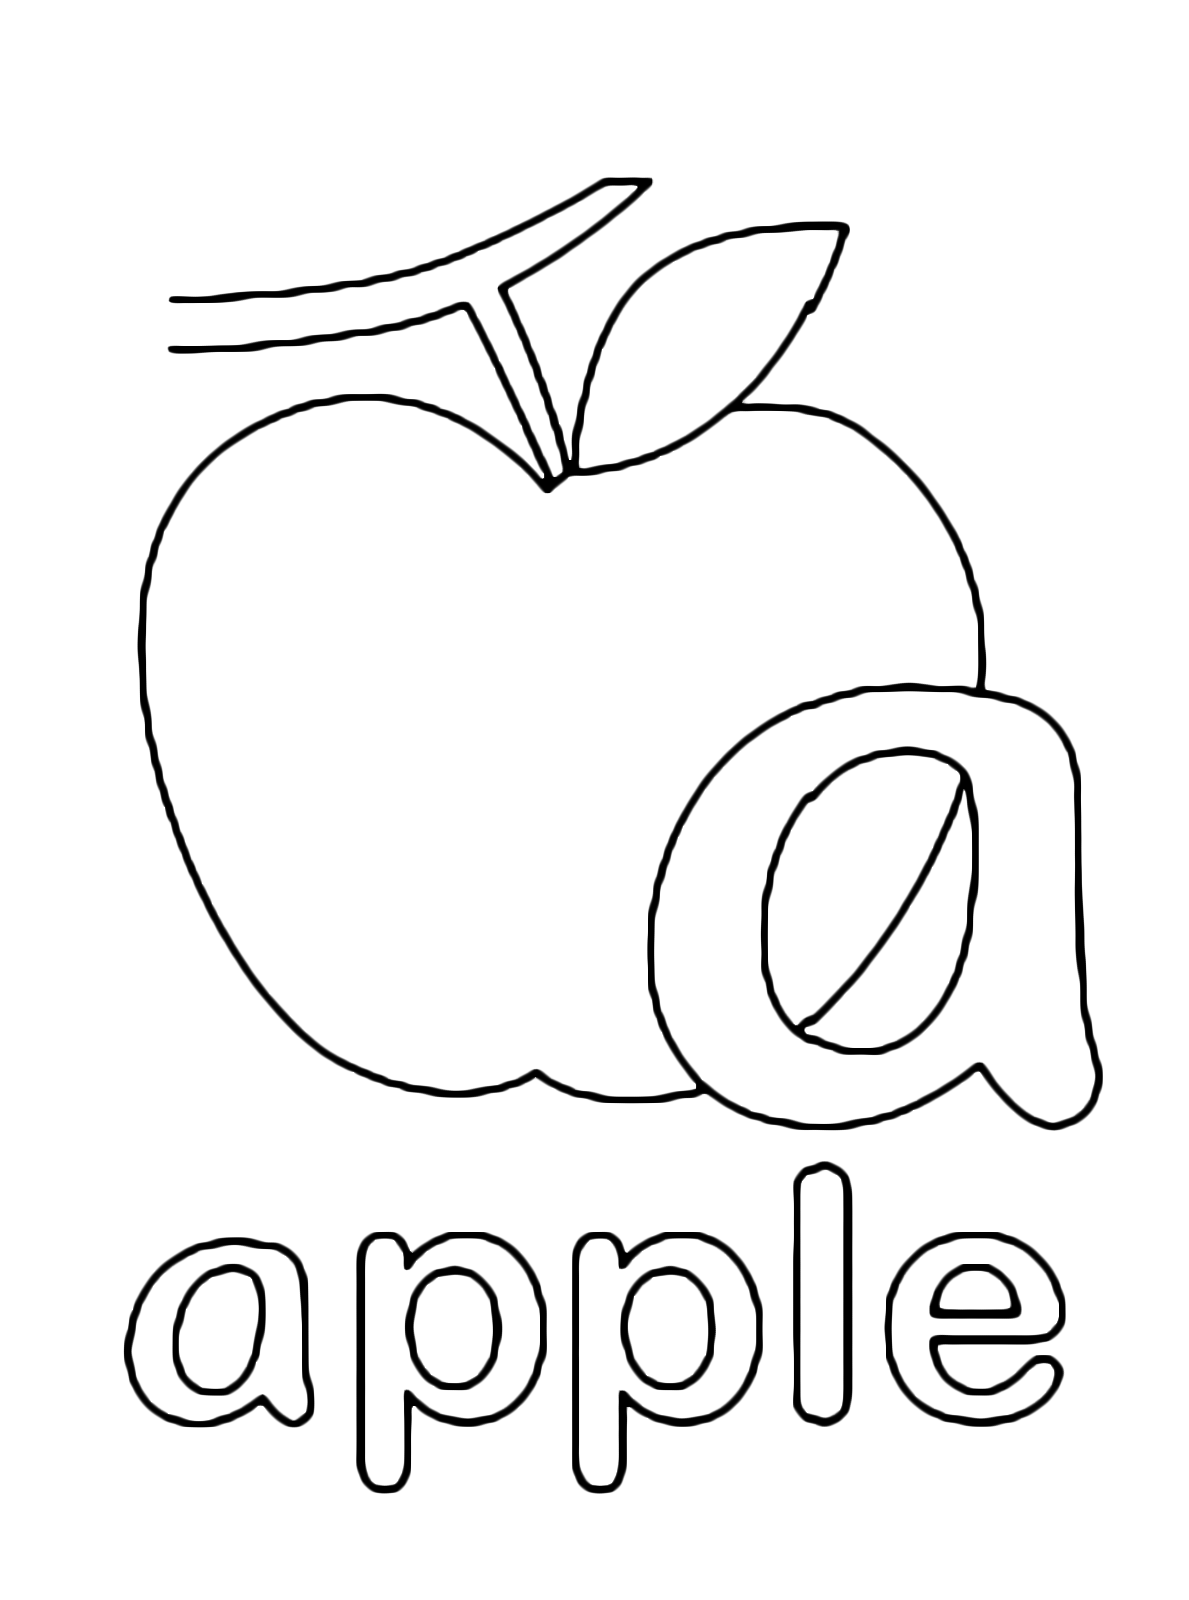 Letters and numbers - a for apple lowercase letter